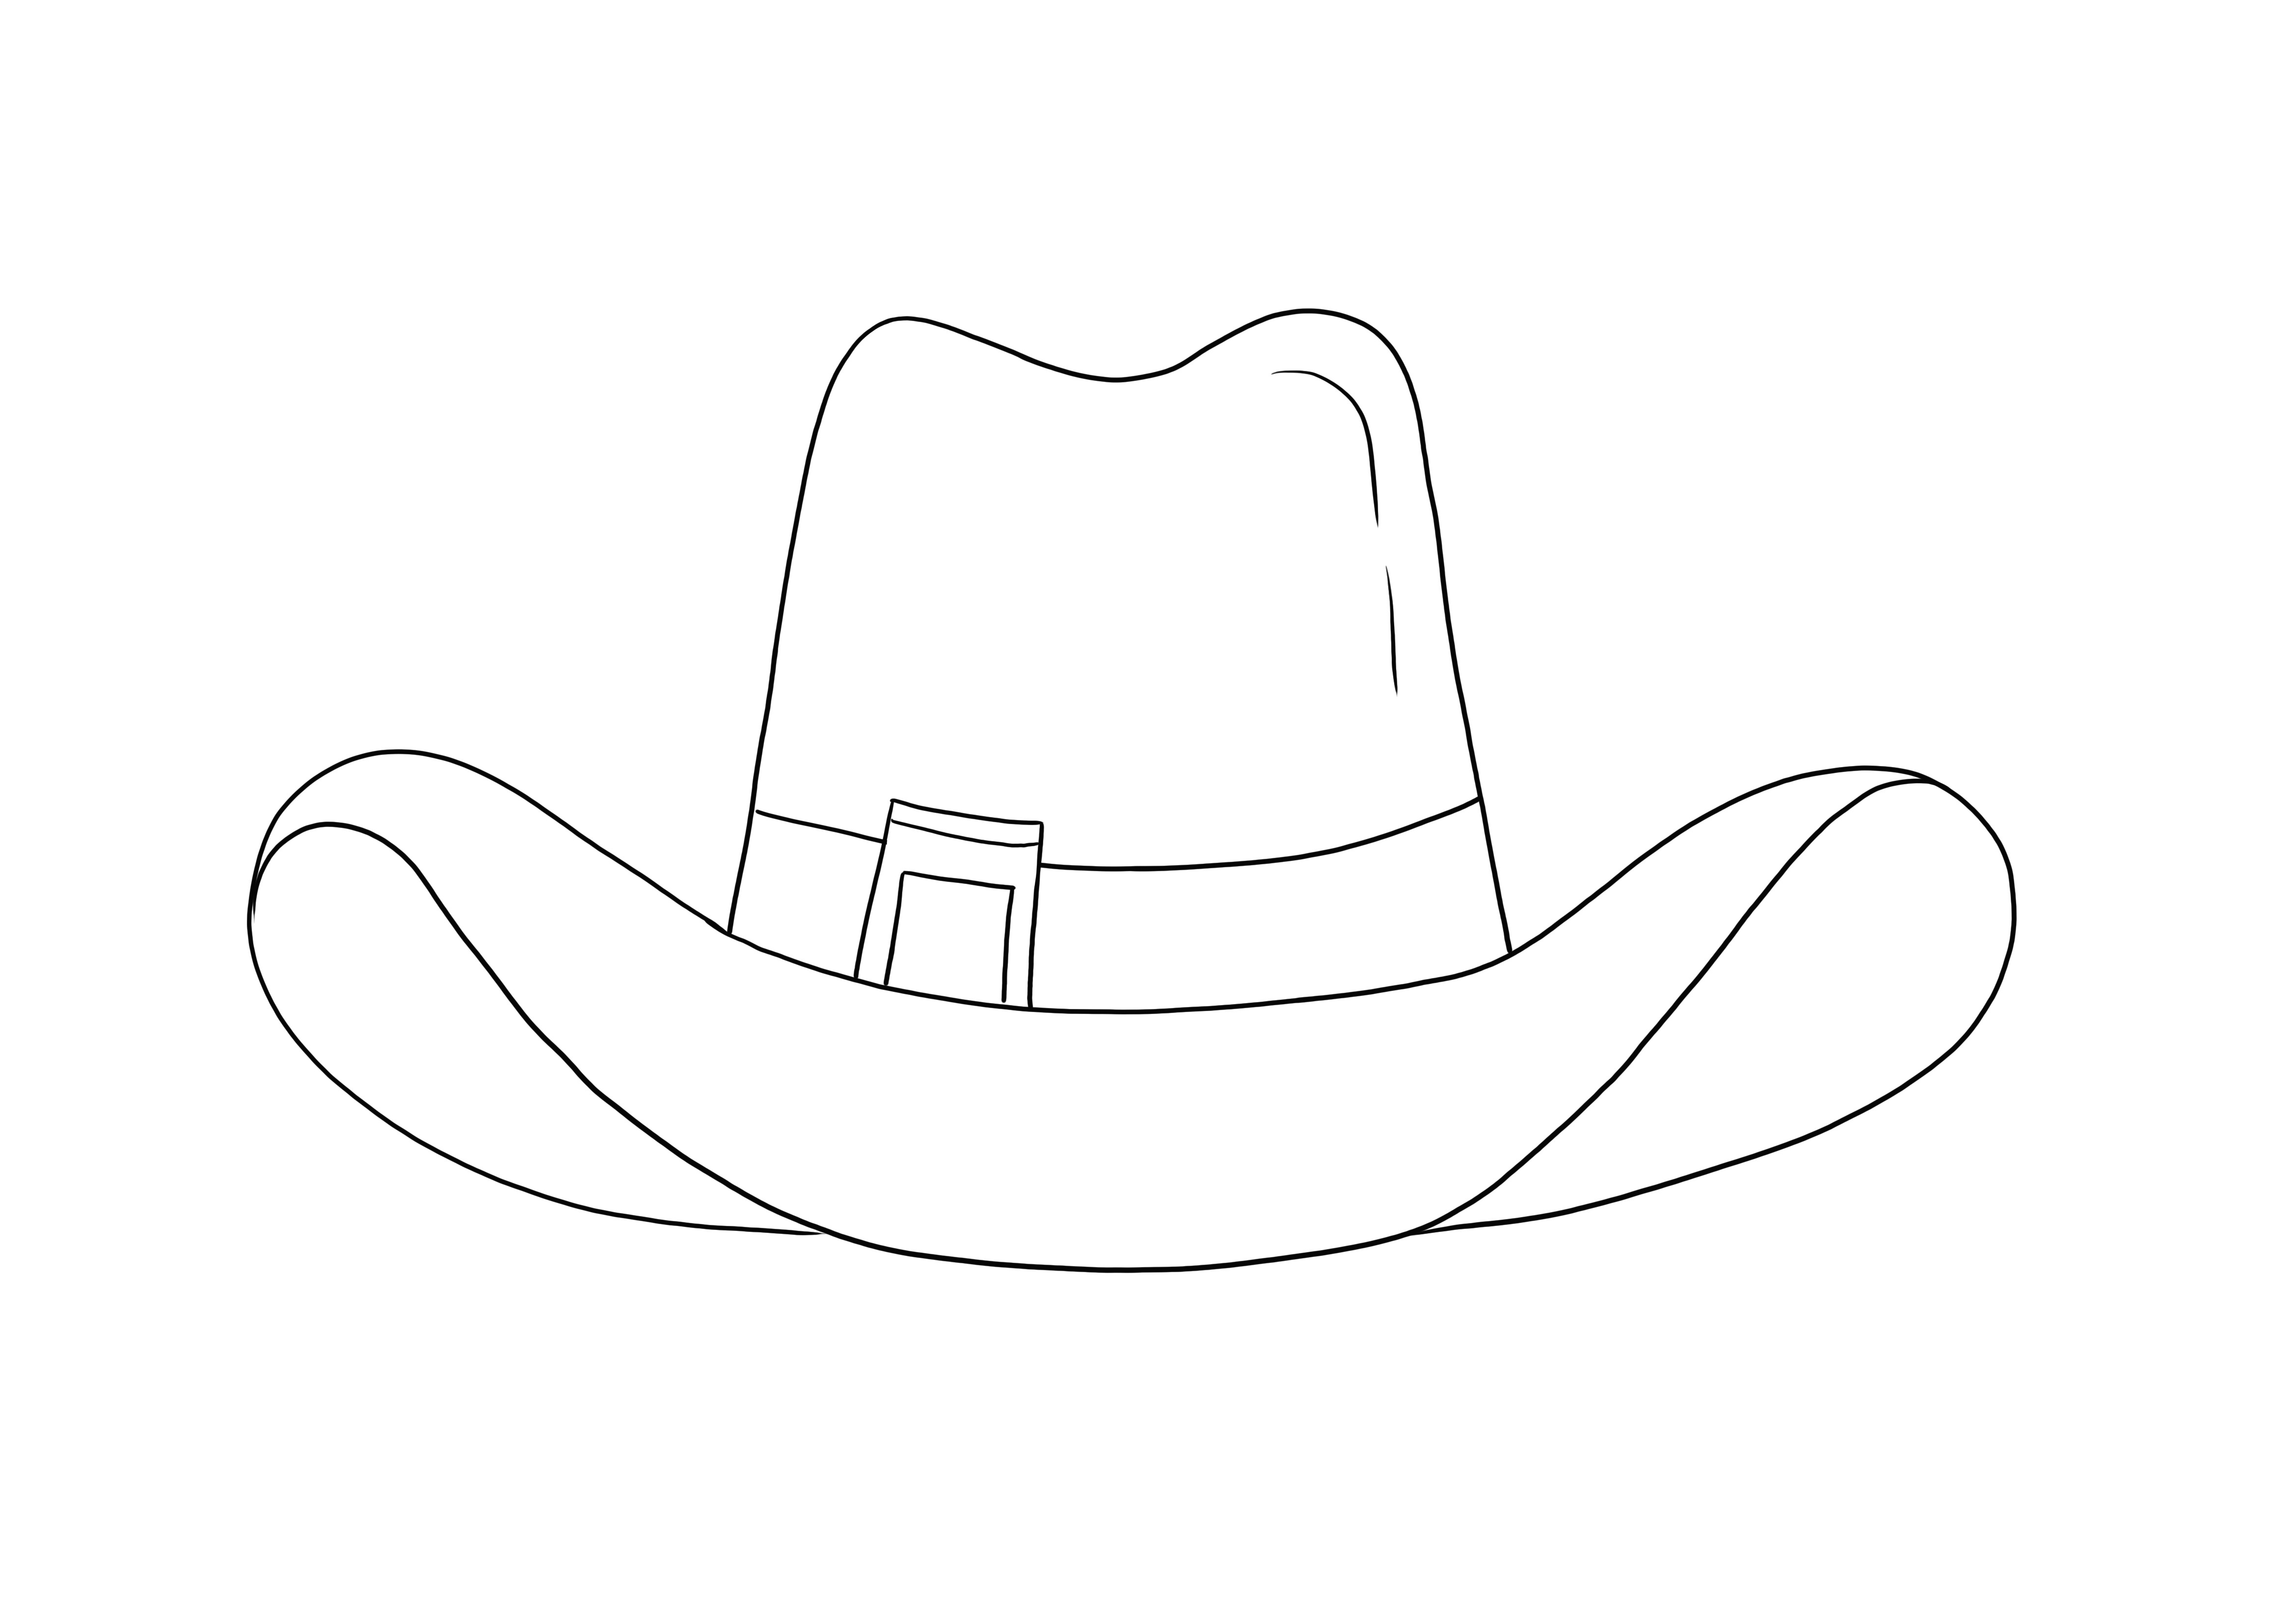 Cowboy Hat free to color and print for kids to learn about cultural specifics